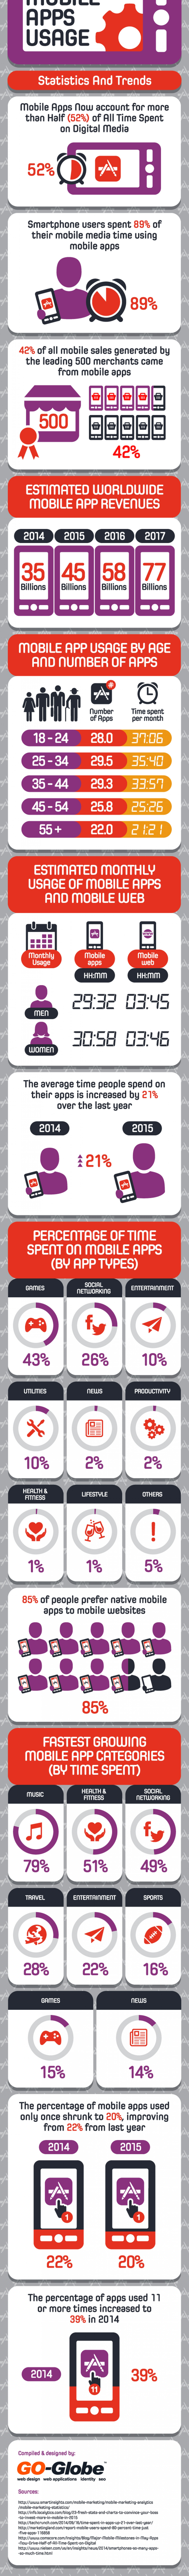 mobile-apps-usage-statistics-and-trends